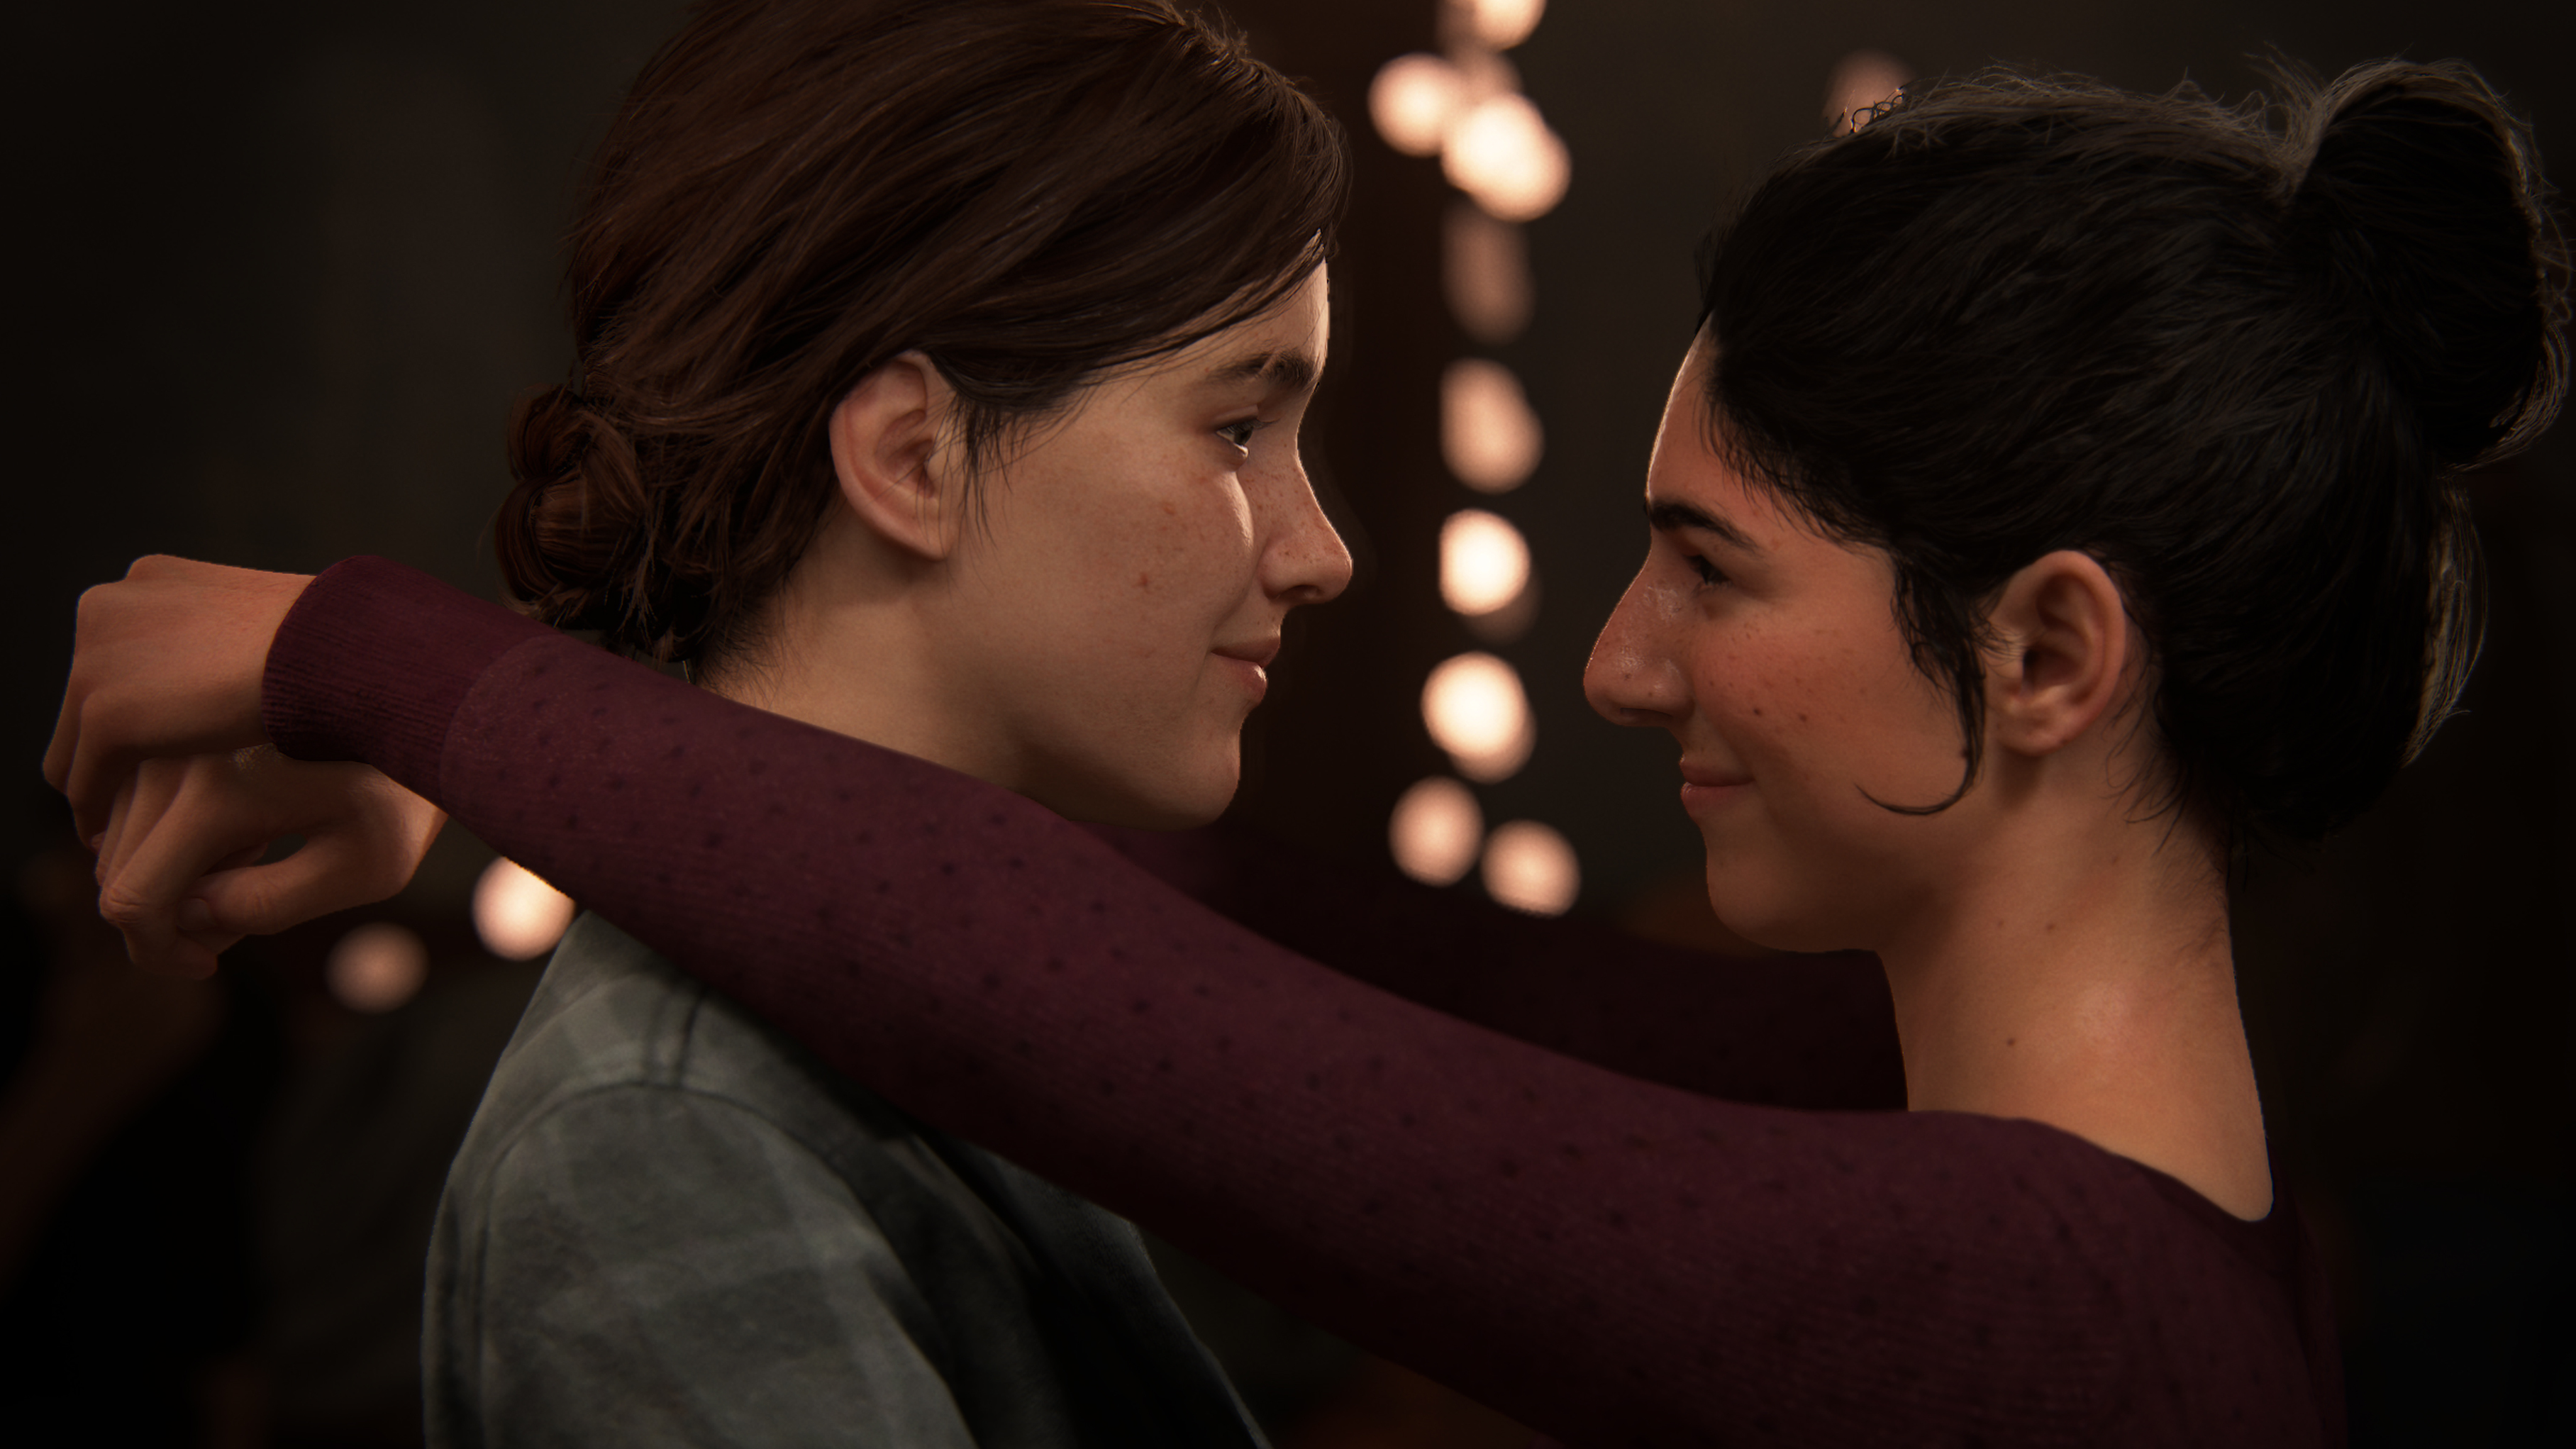 Tommy Visits Ellie and Dina Scene - THE LAST OF US 2 (THE LAST